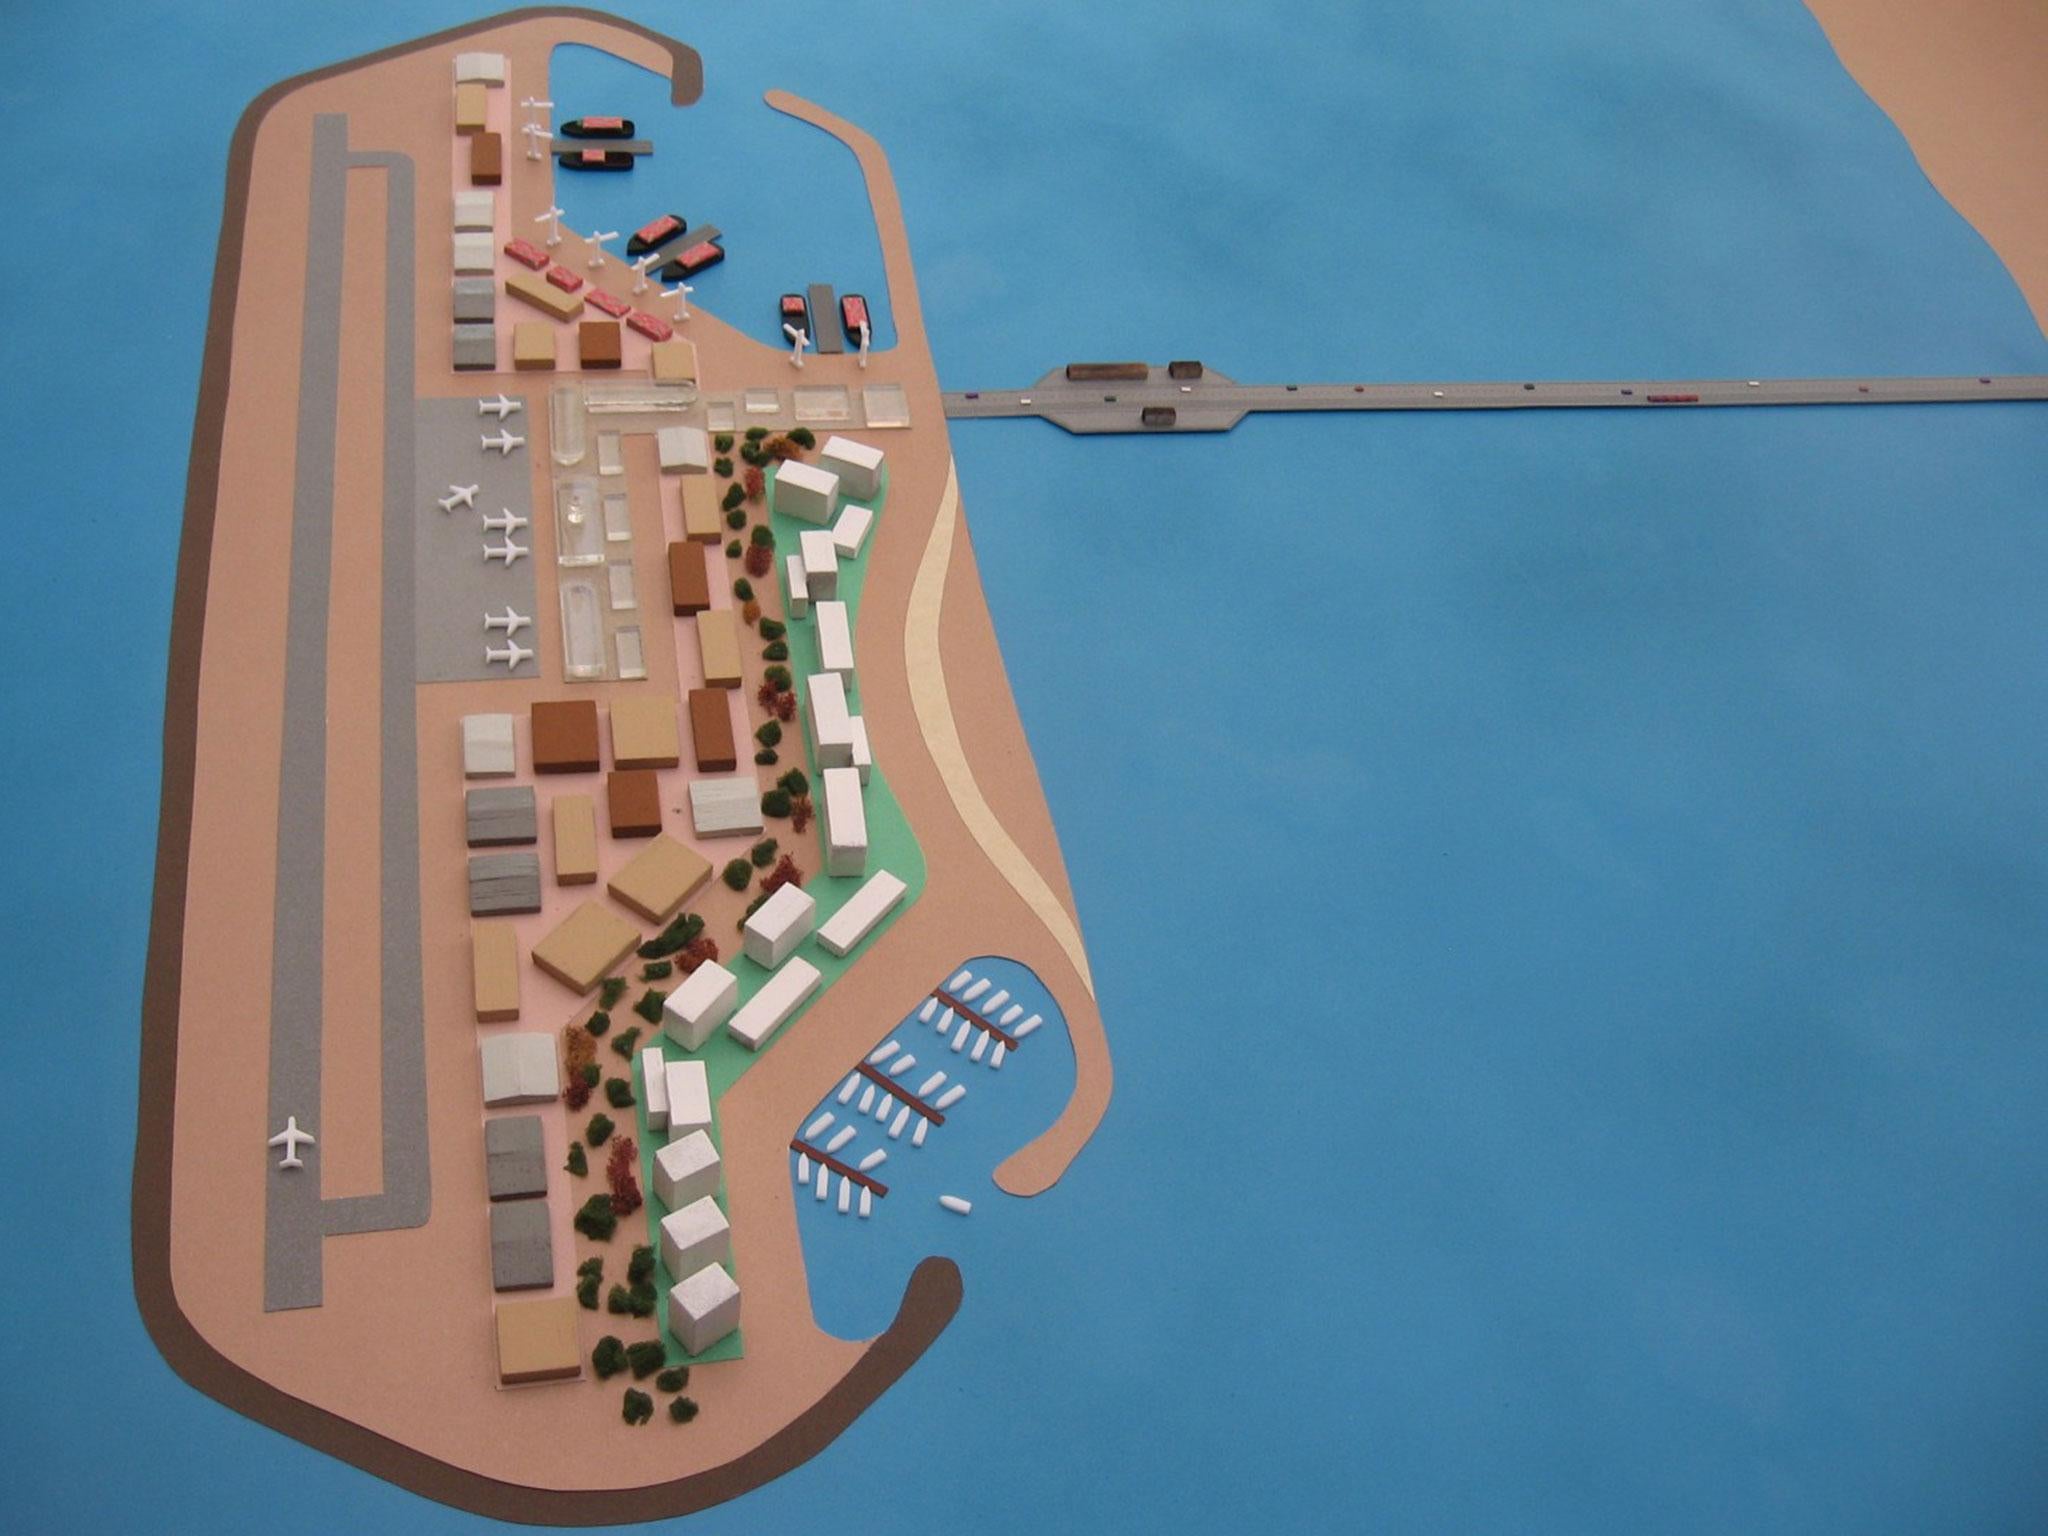 The plans call for an three square mile artificial island, linked to Gaza by a three-mile bridge